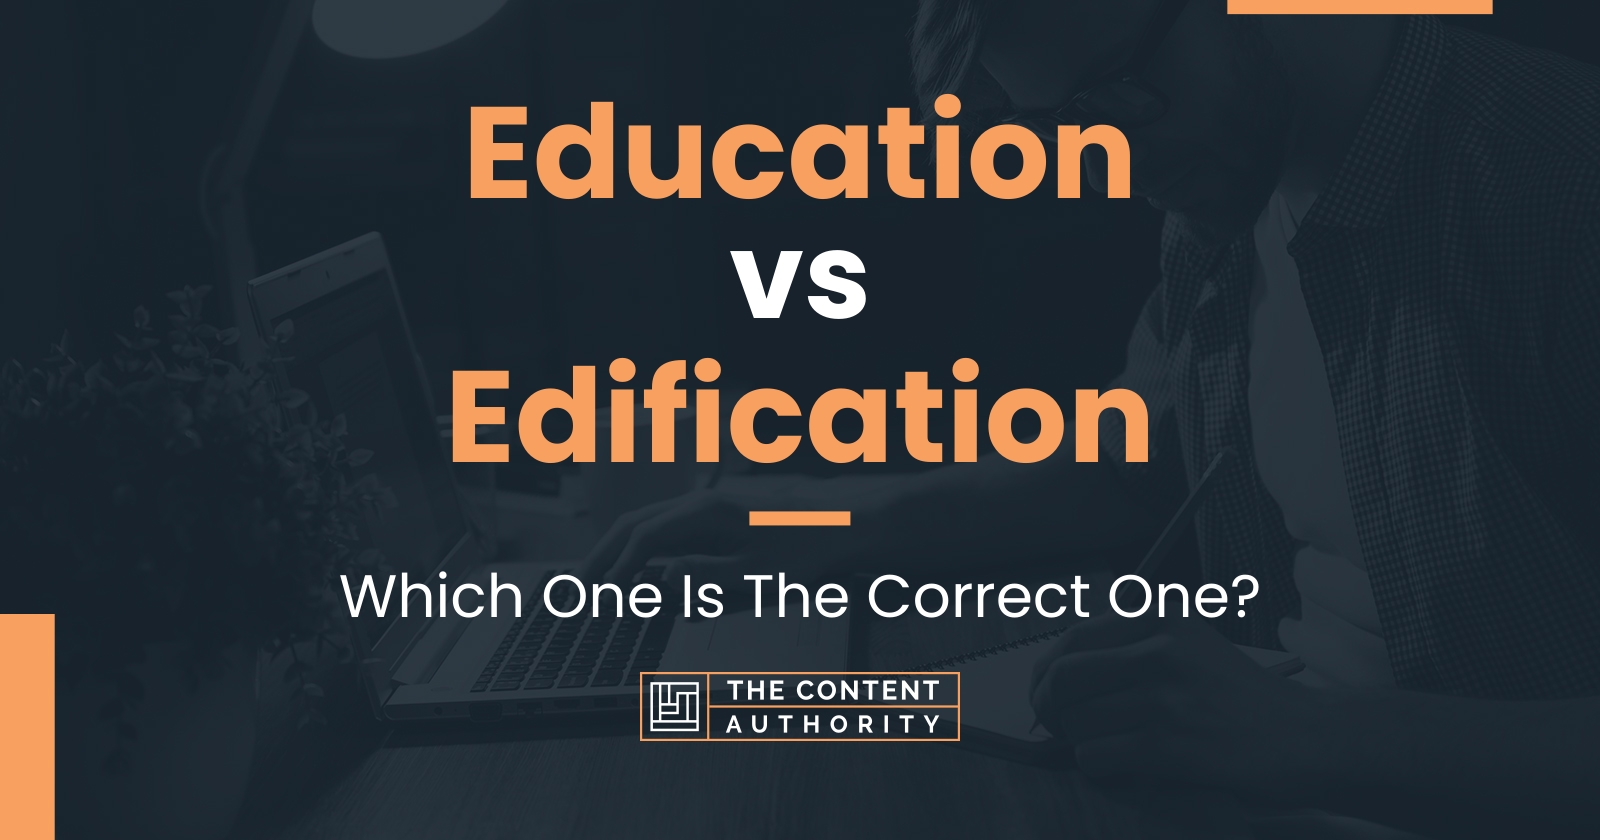 Education vs Edification: Which One Is The Correct One?